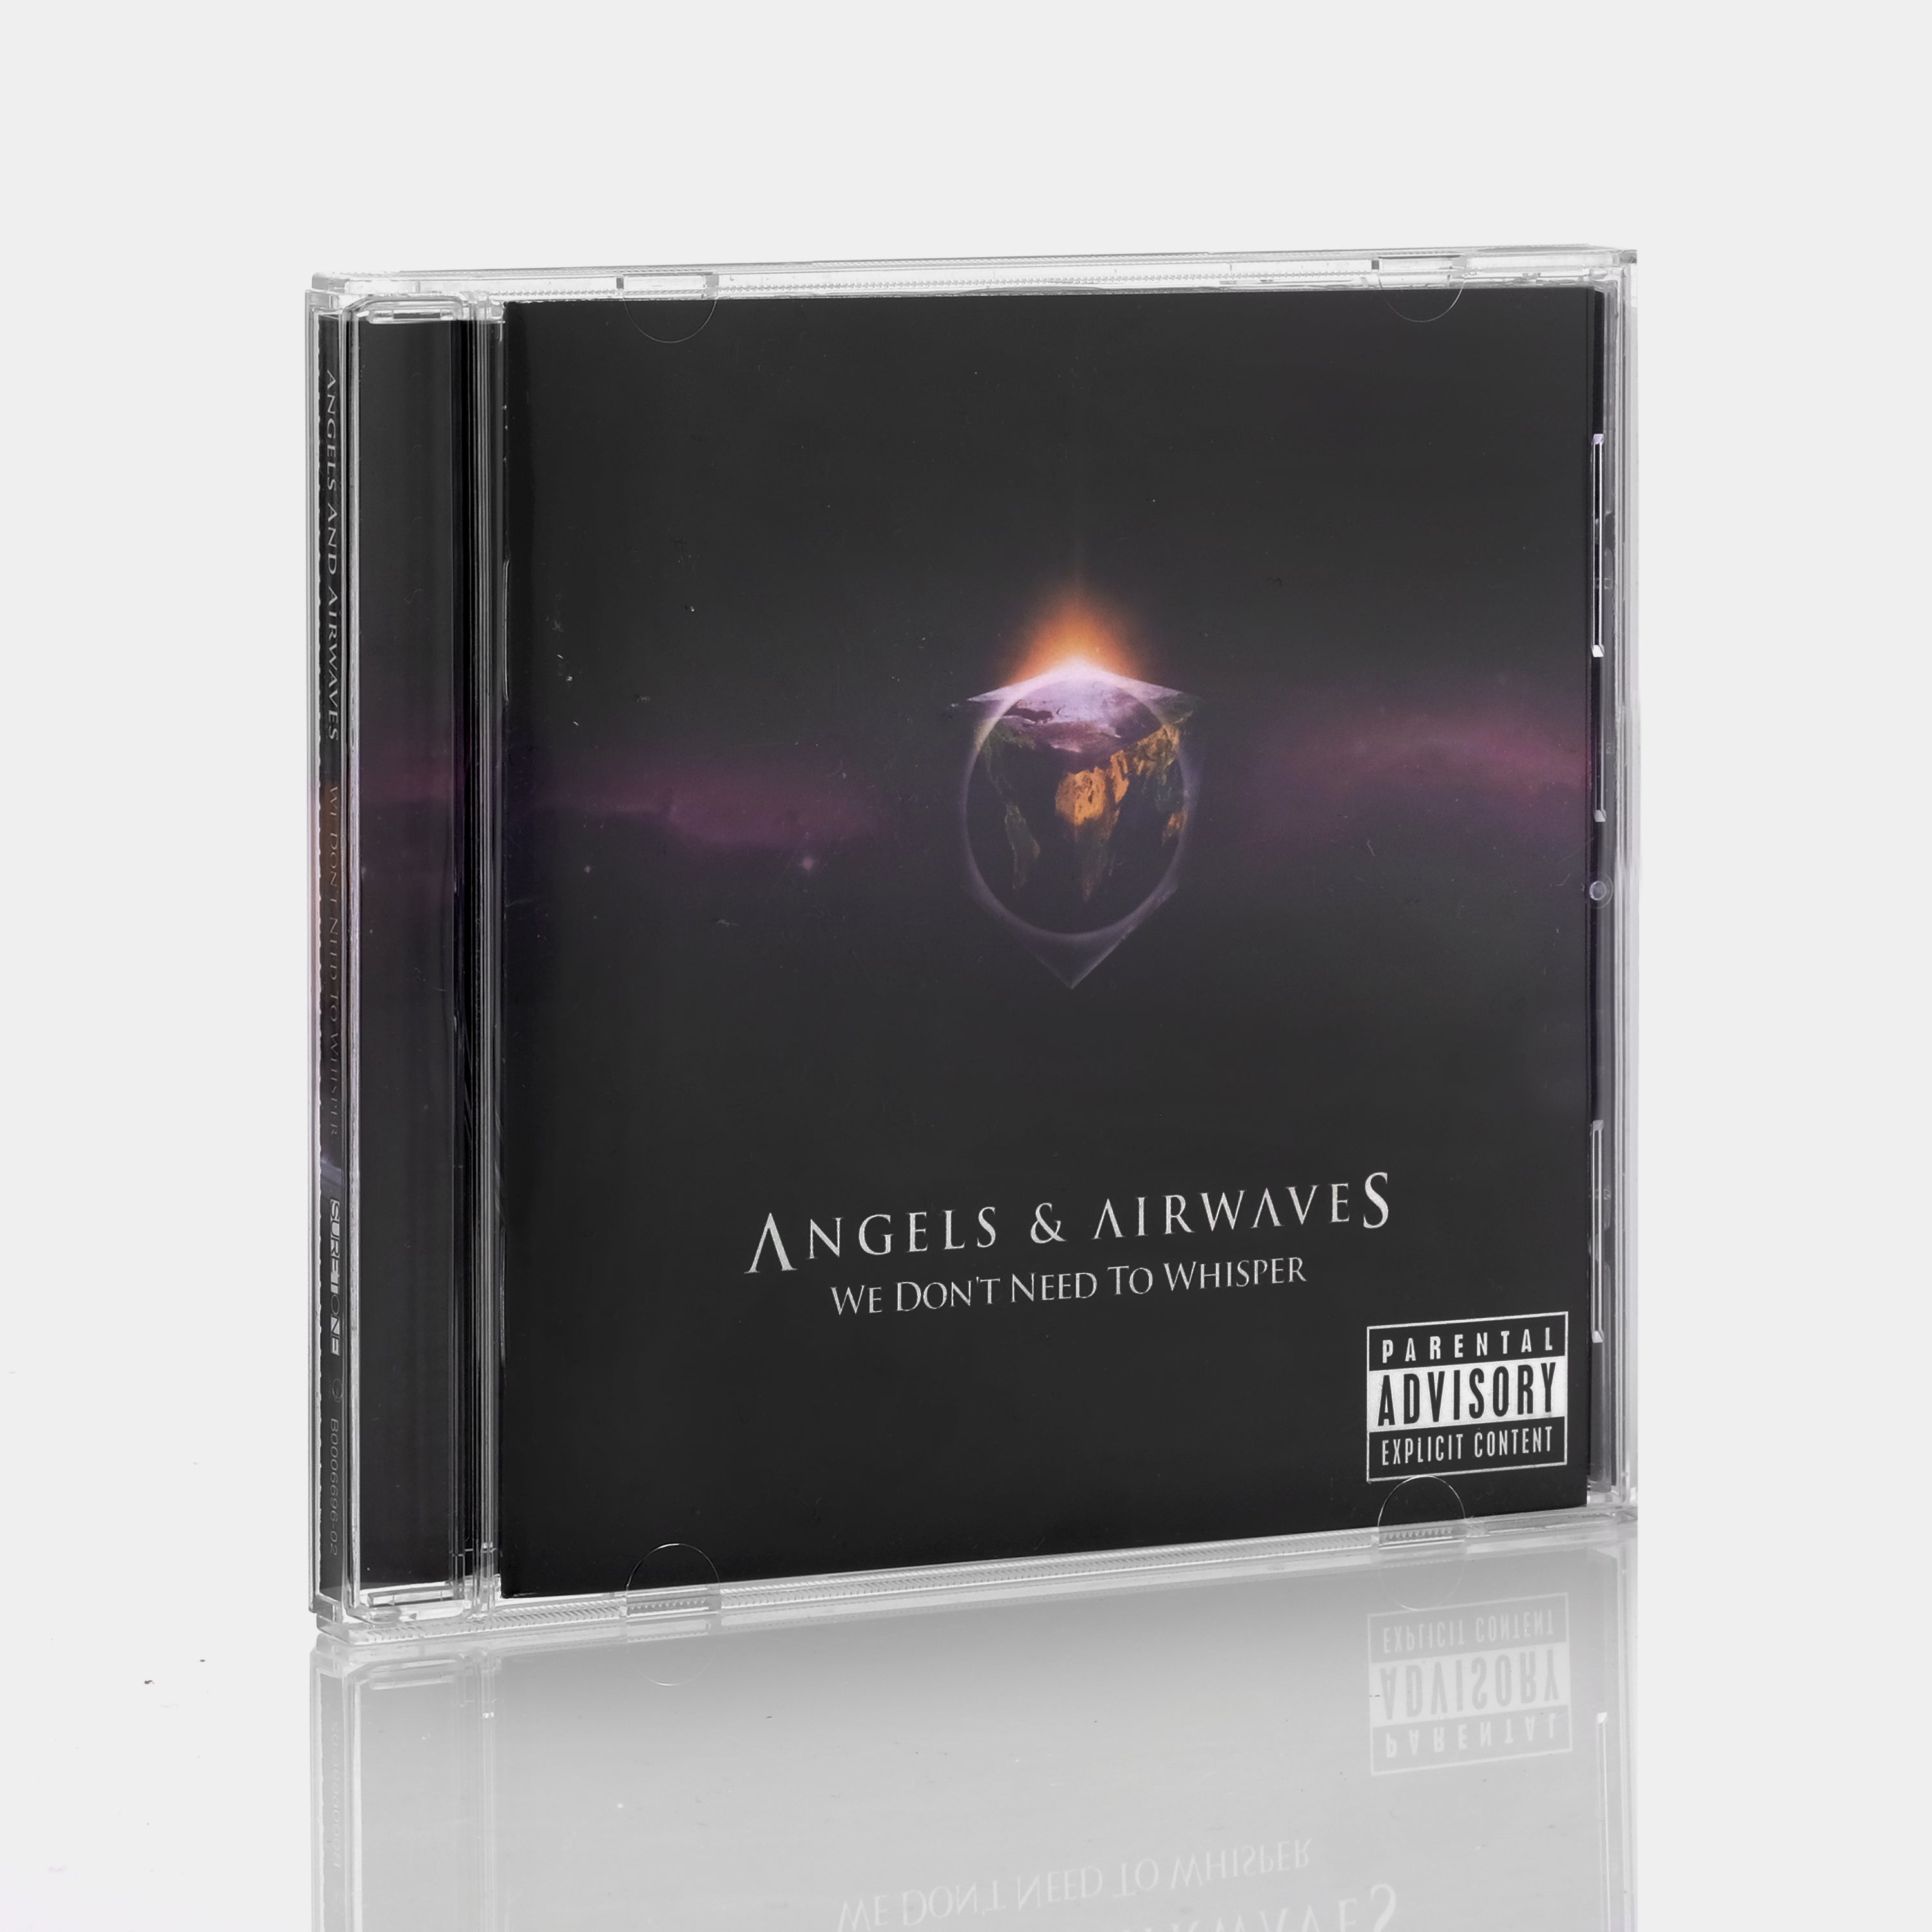 Angels & Airwaves - We Don't Need To Whisper CD